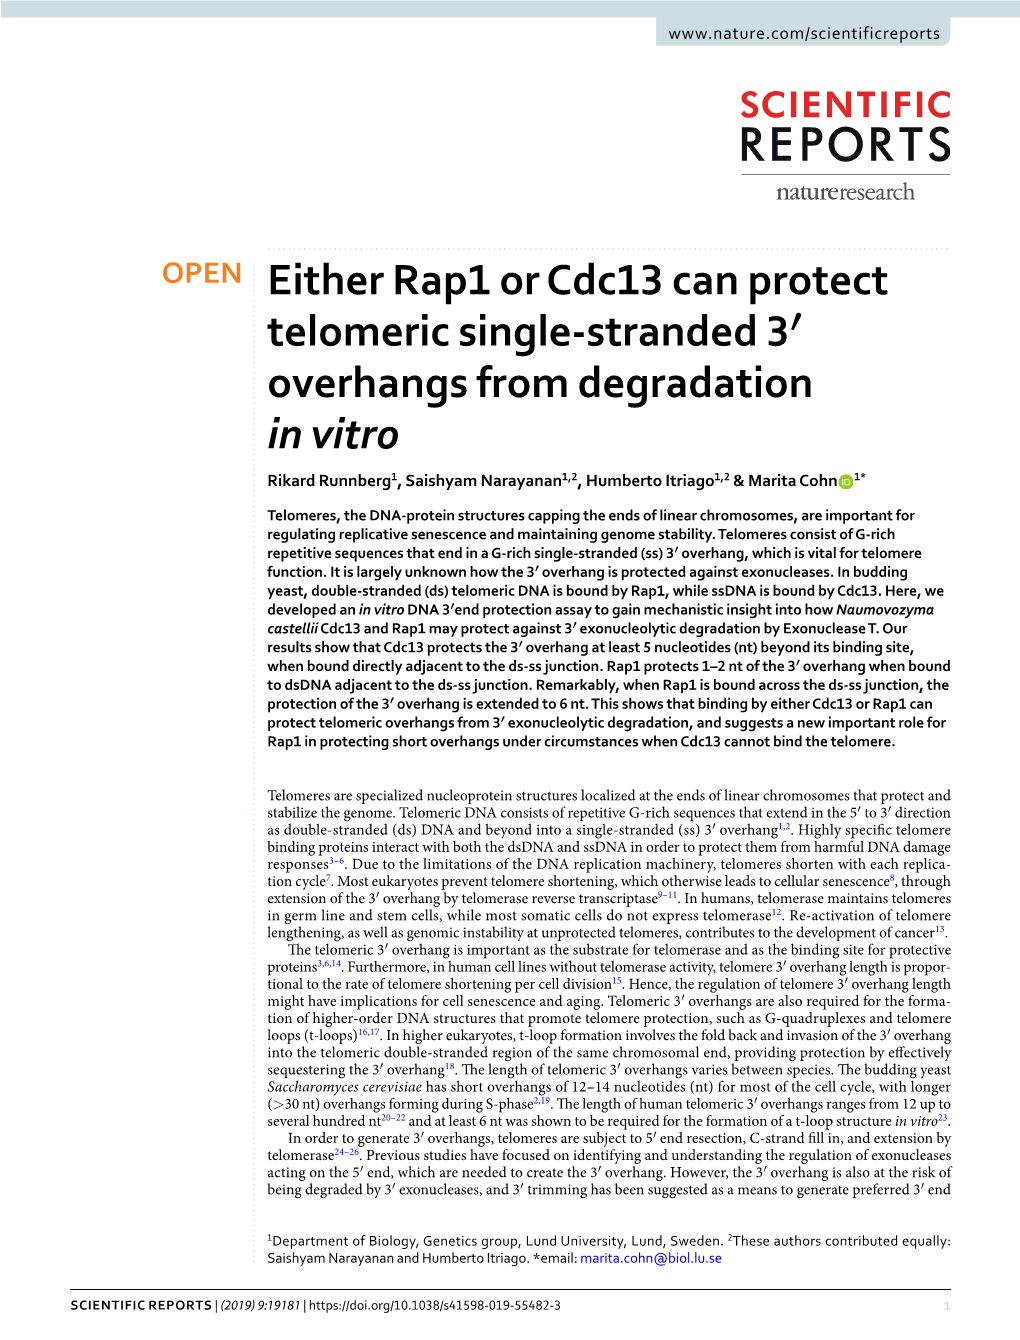 Either Rap1 Or Cdc13 Can Protect Telomeric Single-Stranded 3